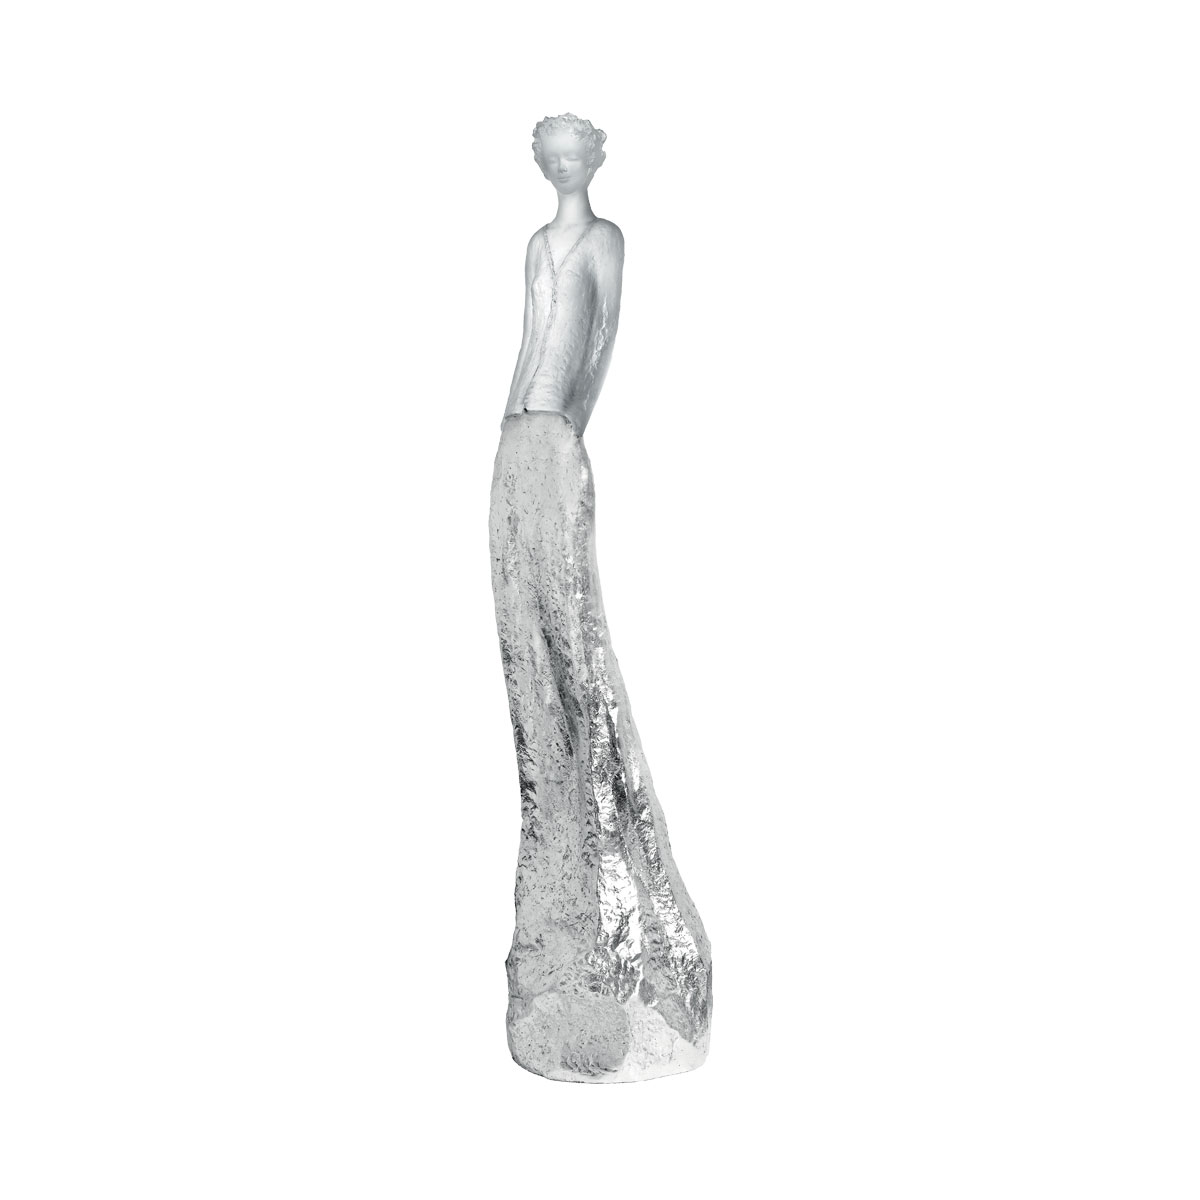 Daum Charlotte in White and Silver by Jean-Philippe Richard, Limited Edition Sculpture